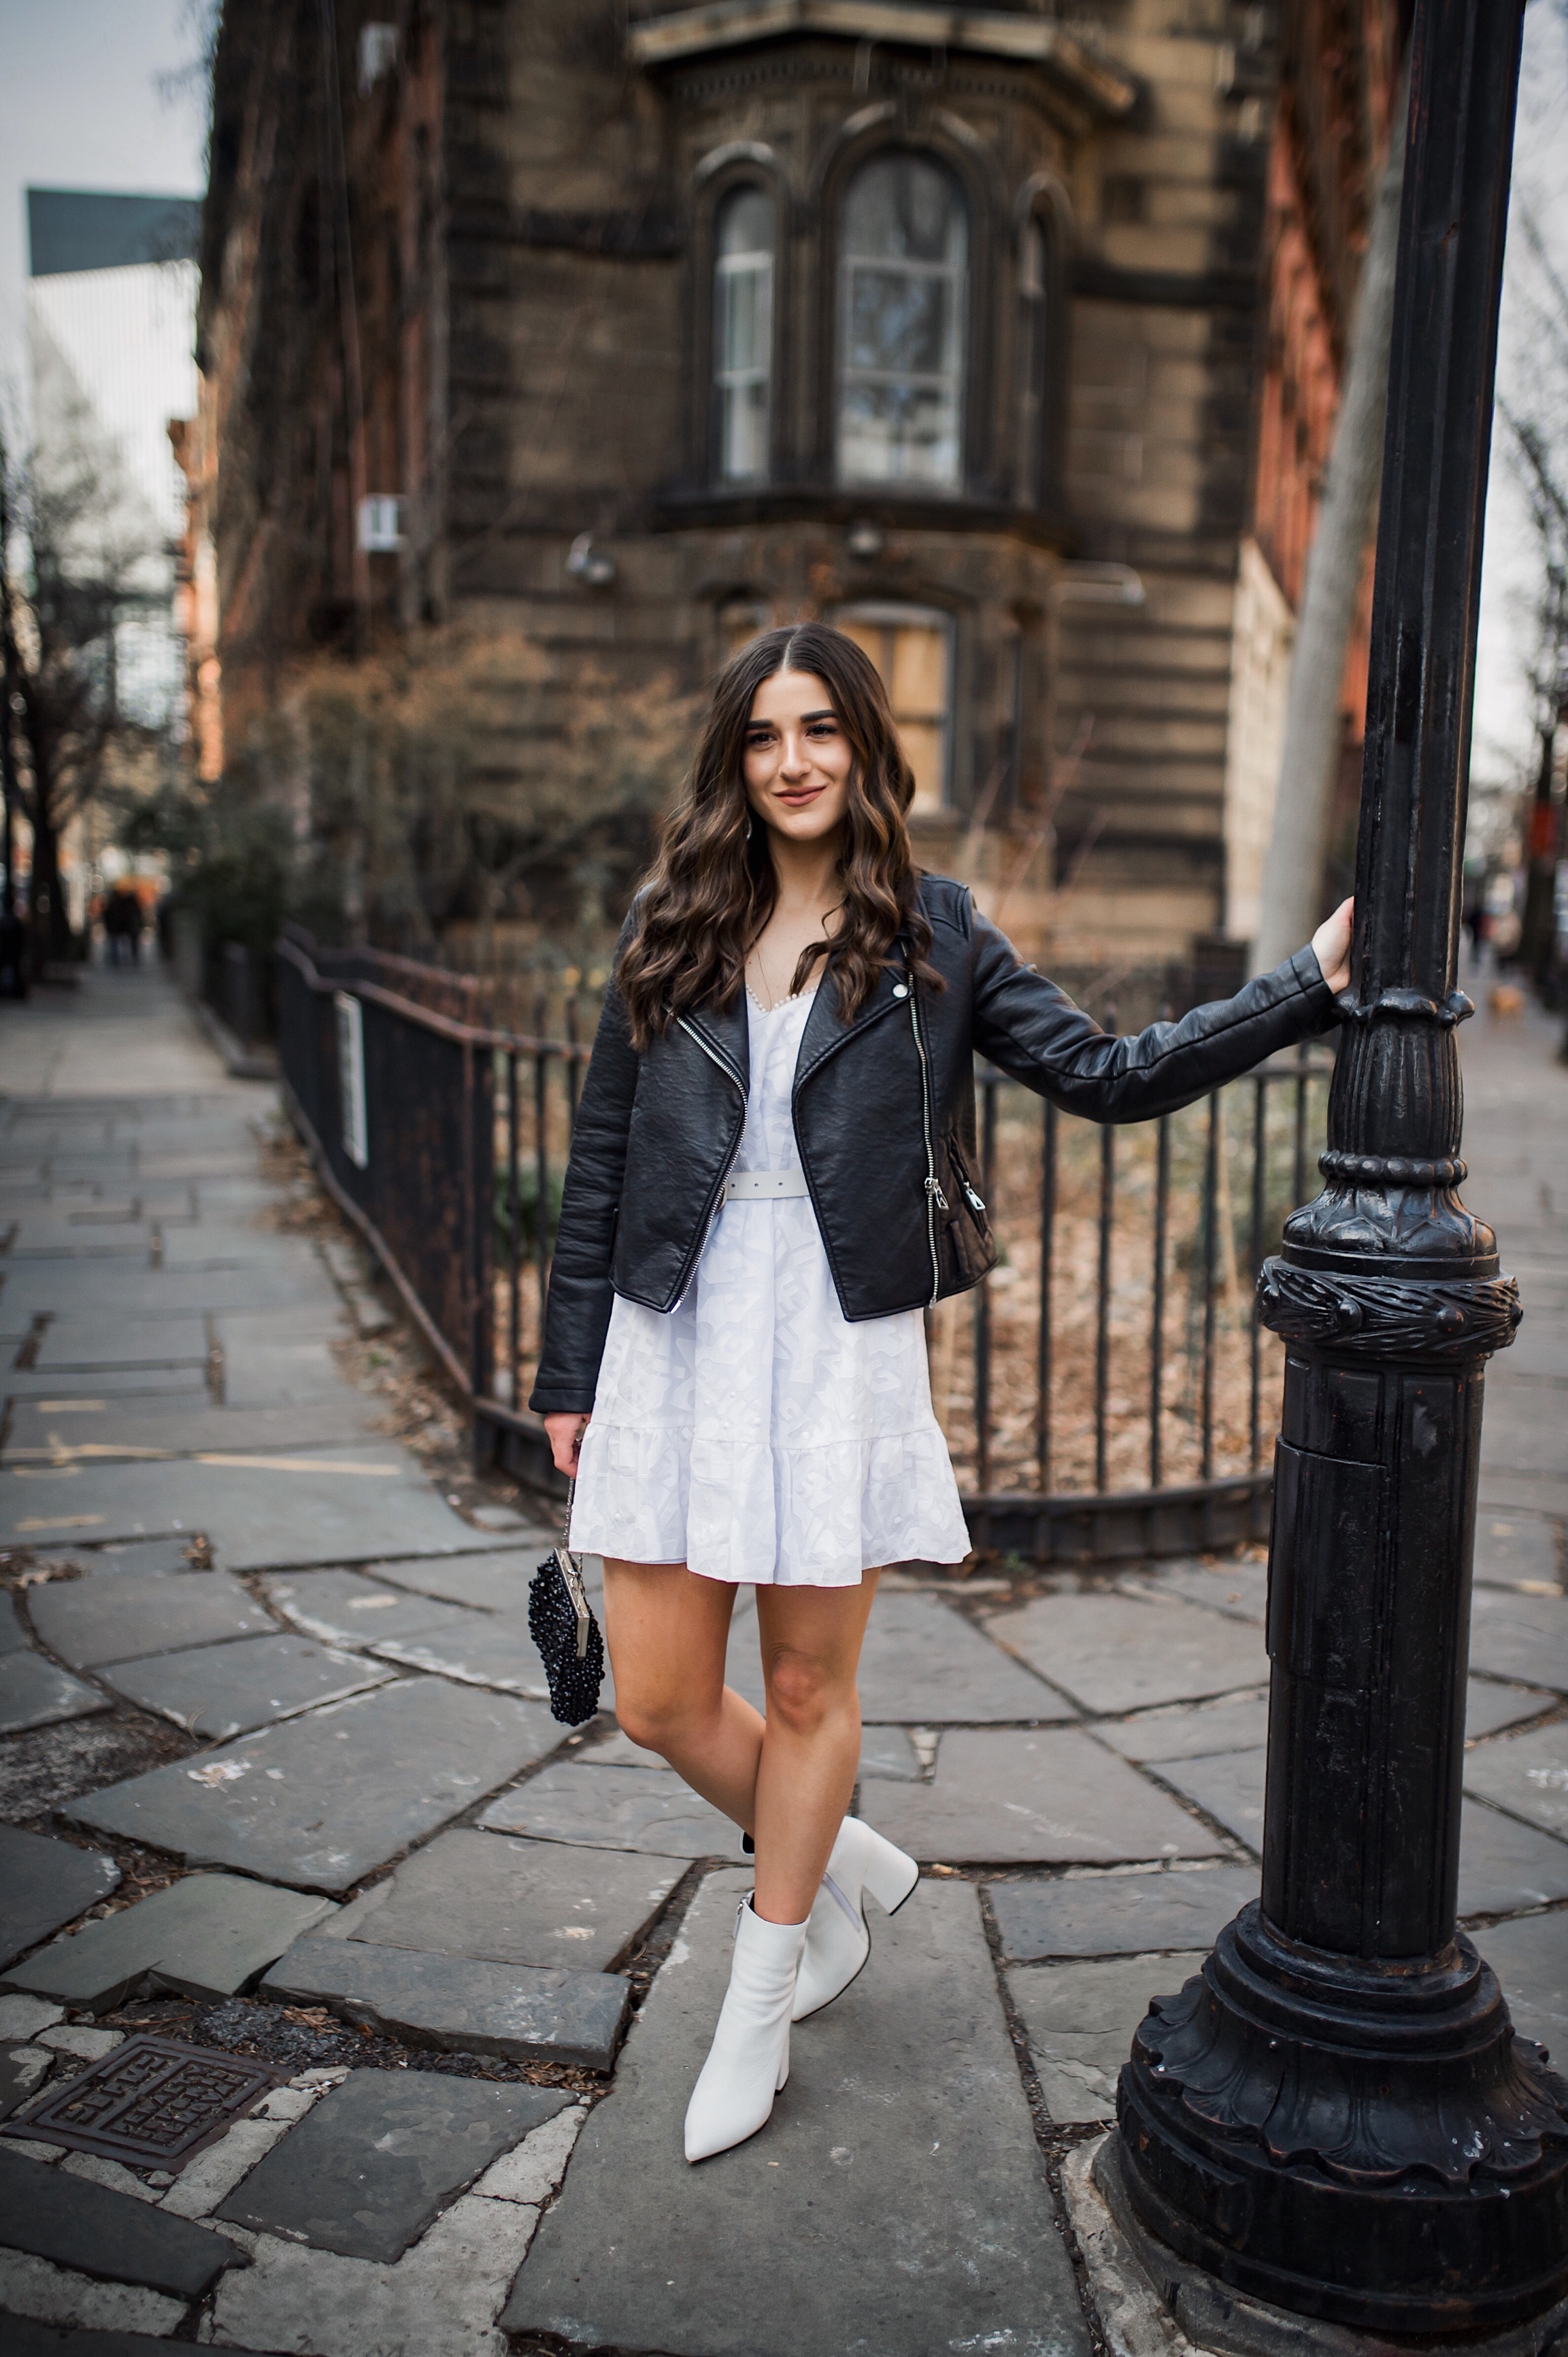 5 Things I Wish Brands Knew White Dress Leather Jacket Esther Santer Fashion Blog NYC Street Style Blogger Outfit OOTD Trendy Shopping Girl What How To Wear Urban Outfitters ASOS Belt Booties Black Beaded  Clutch Long Hair Photoshoot Stuyvesant Shop.JPG